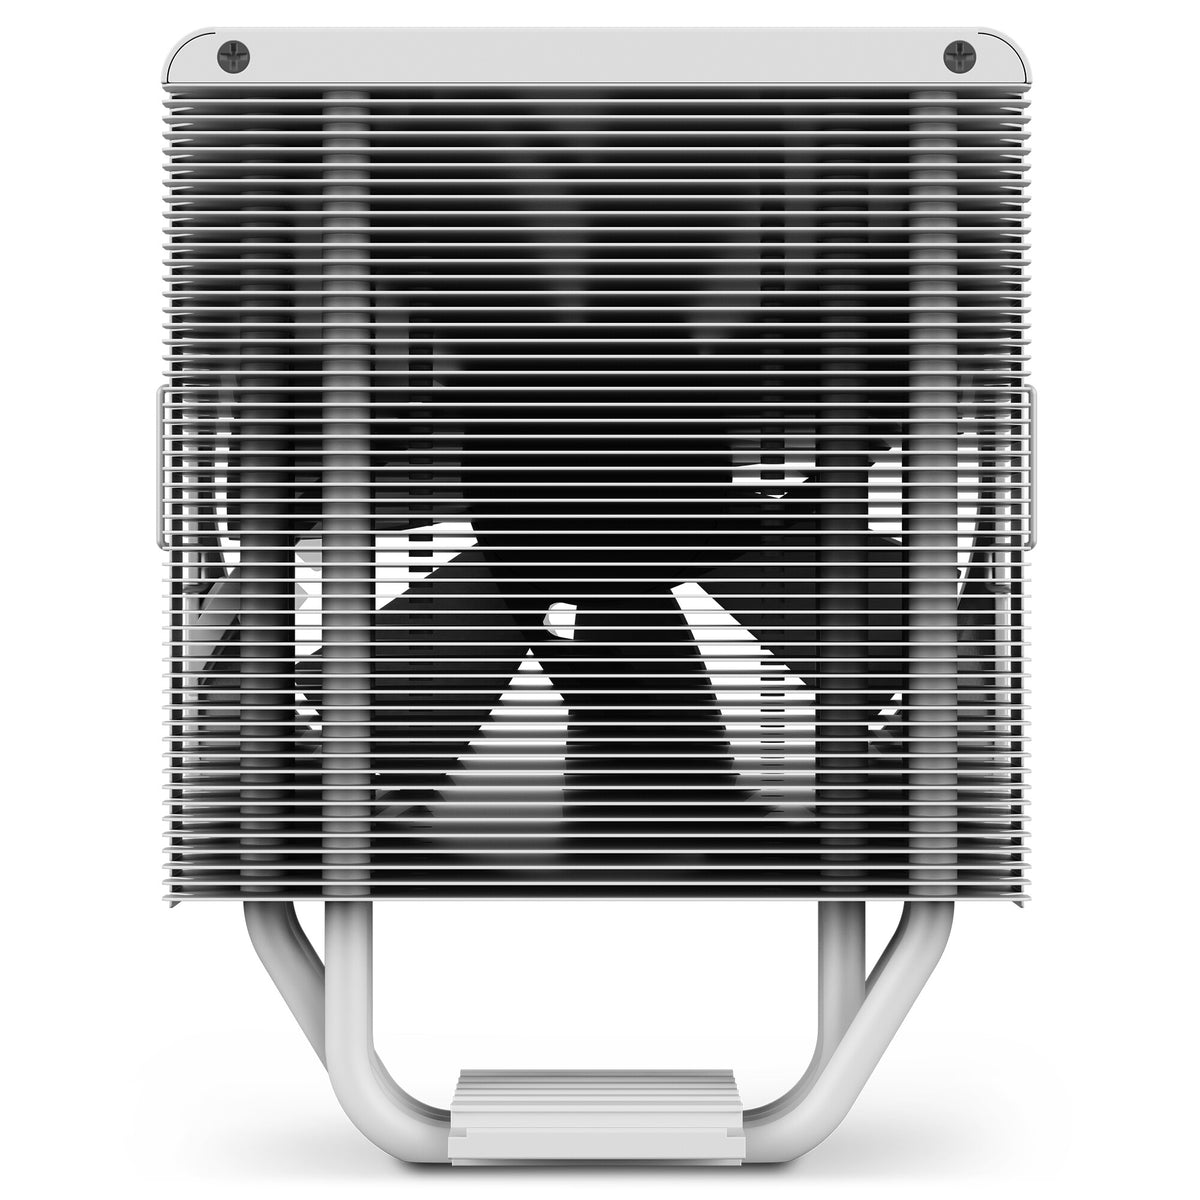 NZXT T120 - Air Processor Cooler in White - 120mm